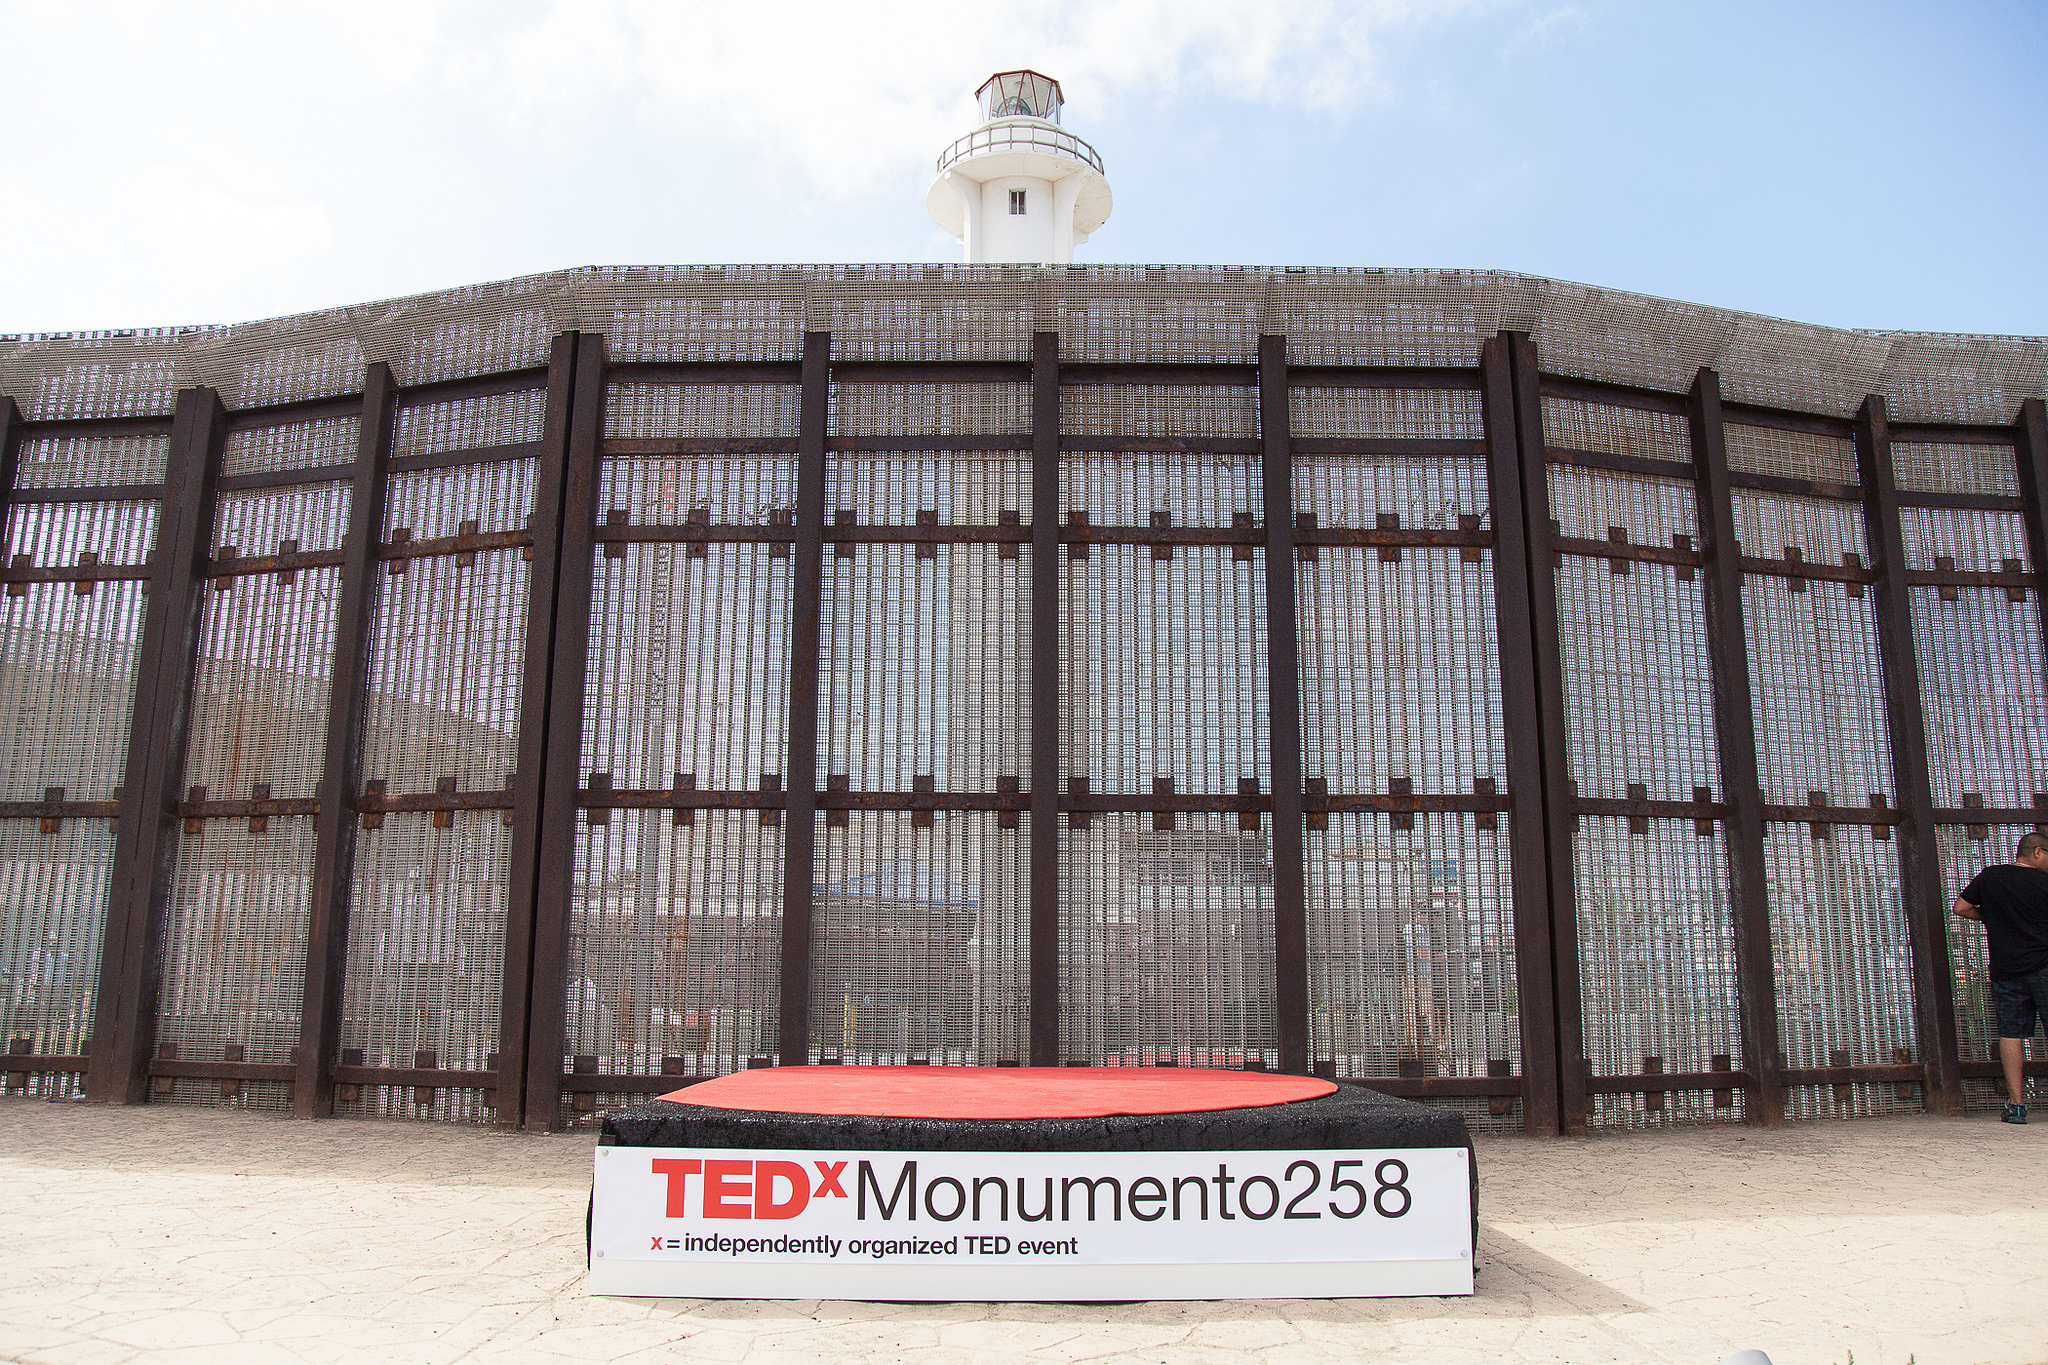 In early September, TEDxMonumento258 became the first TEDx event organized by teams in two different countries and held simultaneously across a border. Planning the event took more than two and a half years. Constraints on the US side proved the most difficult to overcome. Photo: Natalia Robert/TEDxMonumento258